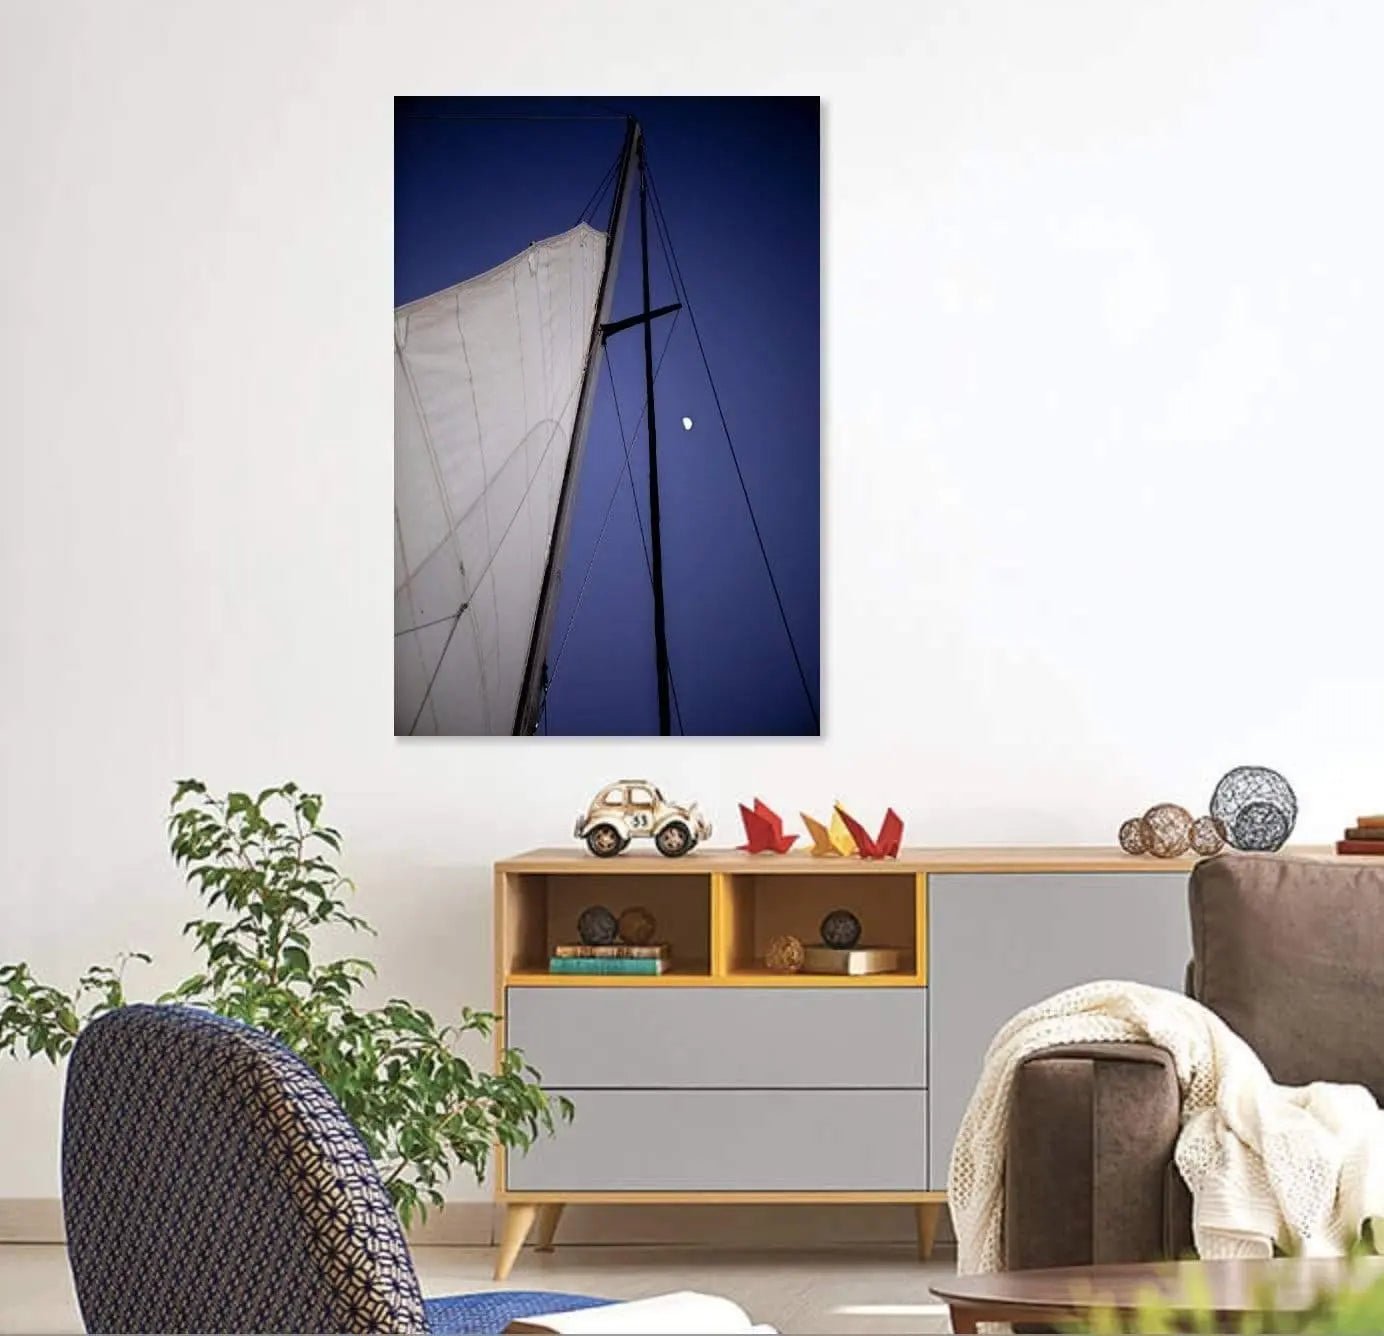 Sailing at night art displayed on wall in family room